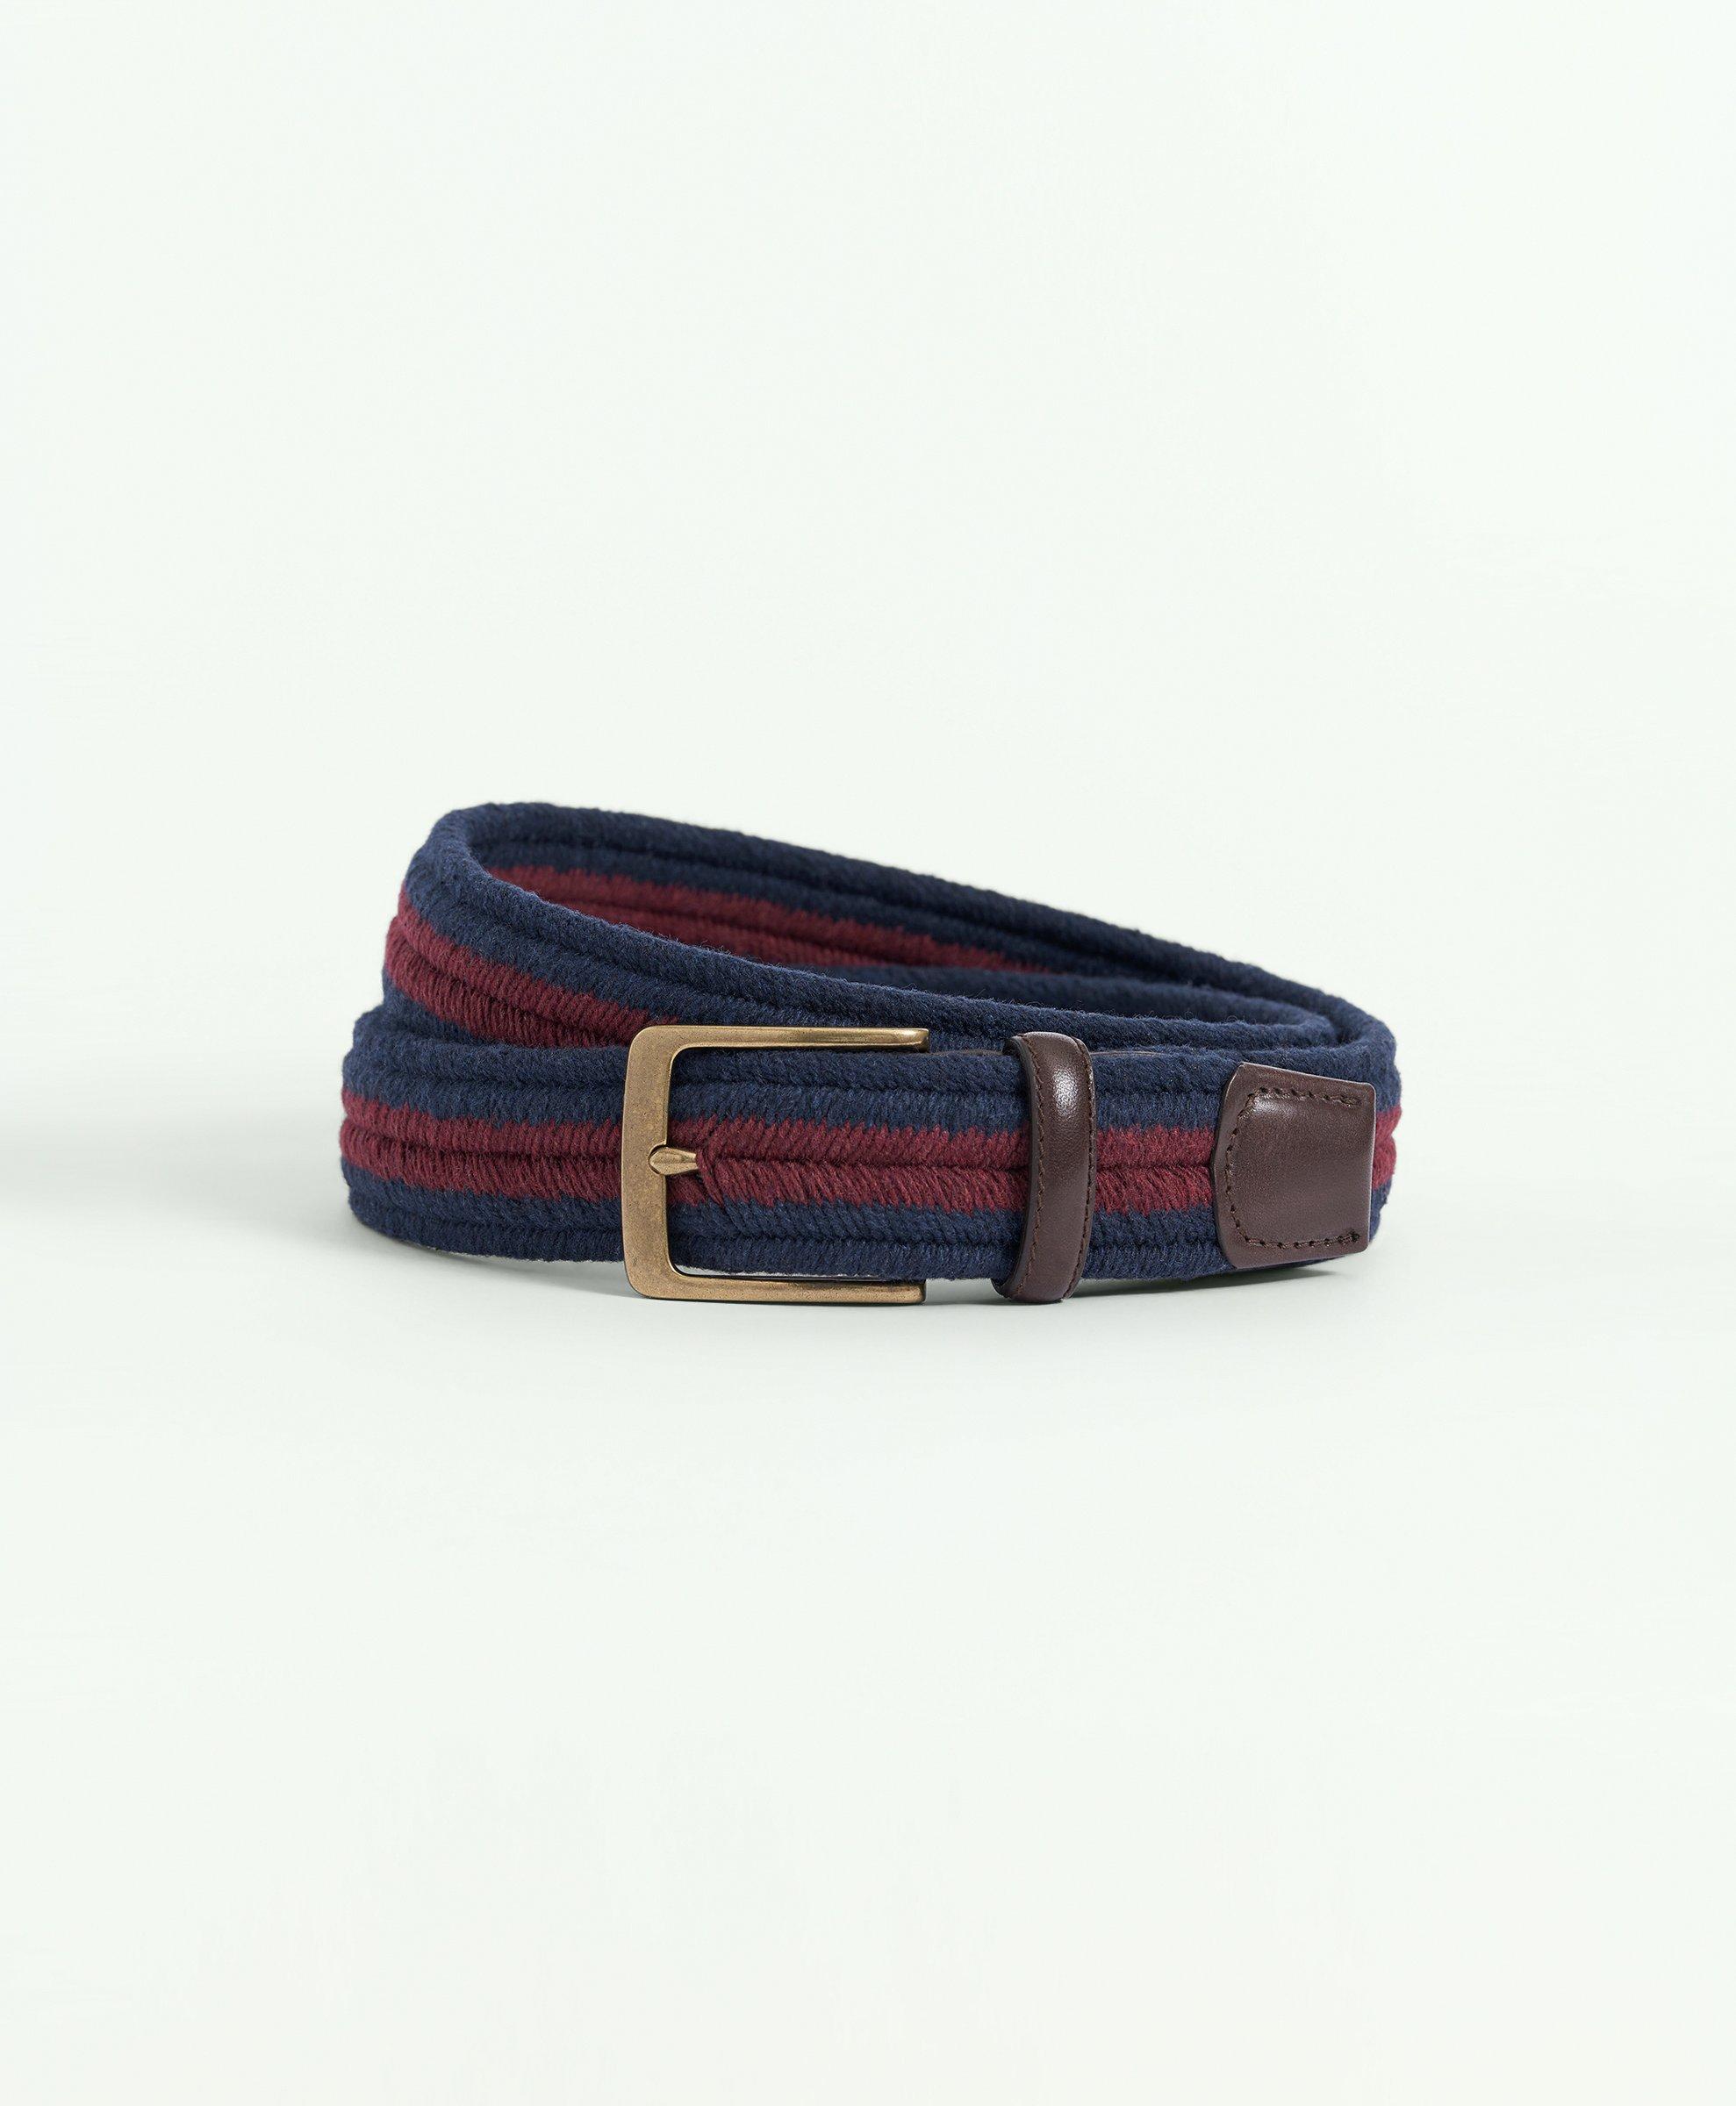 Sale on Men's Belts: Leather, Suede, & More